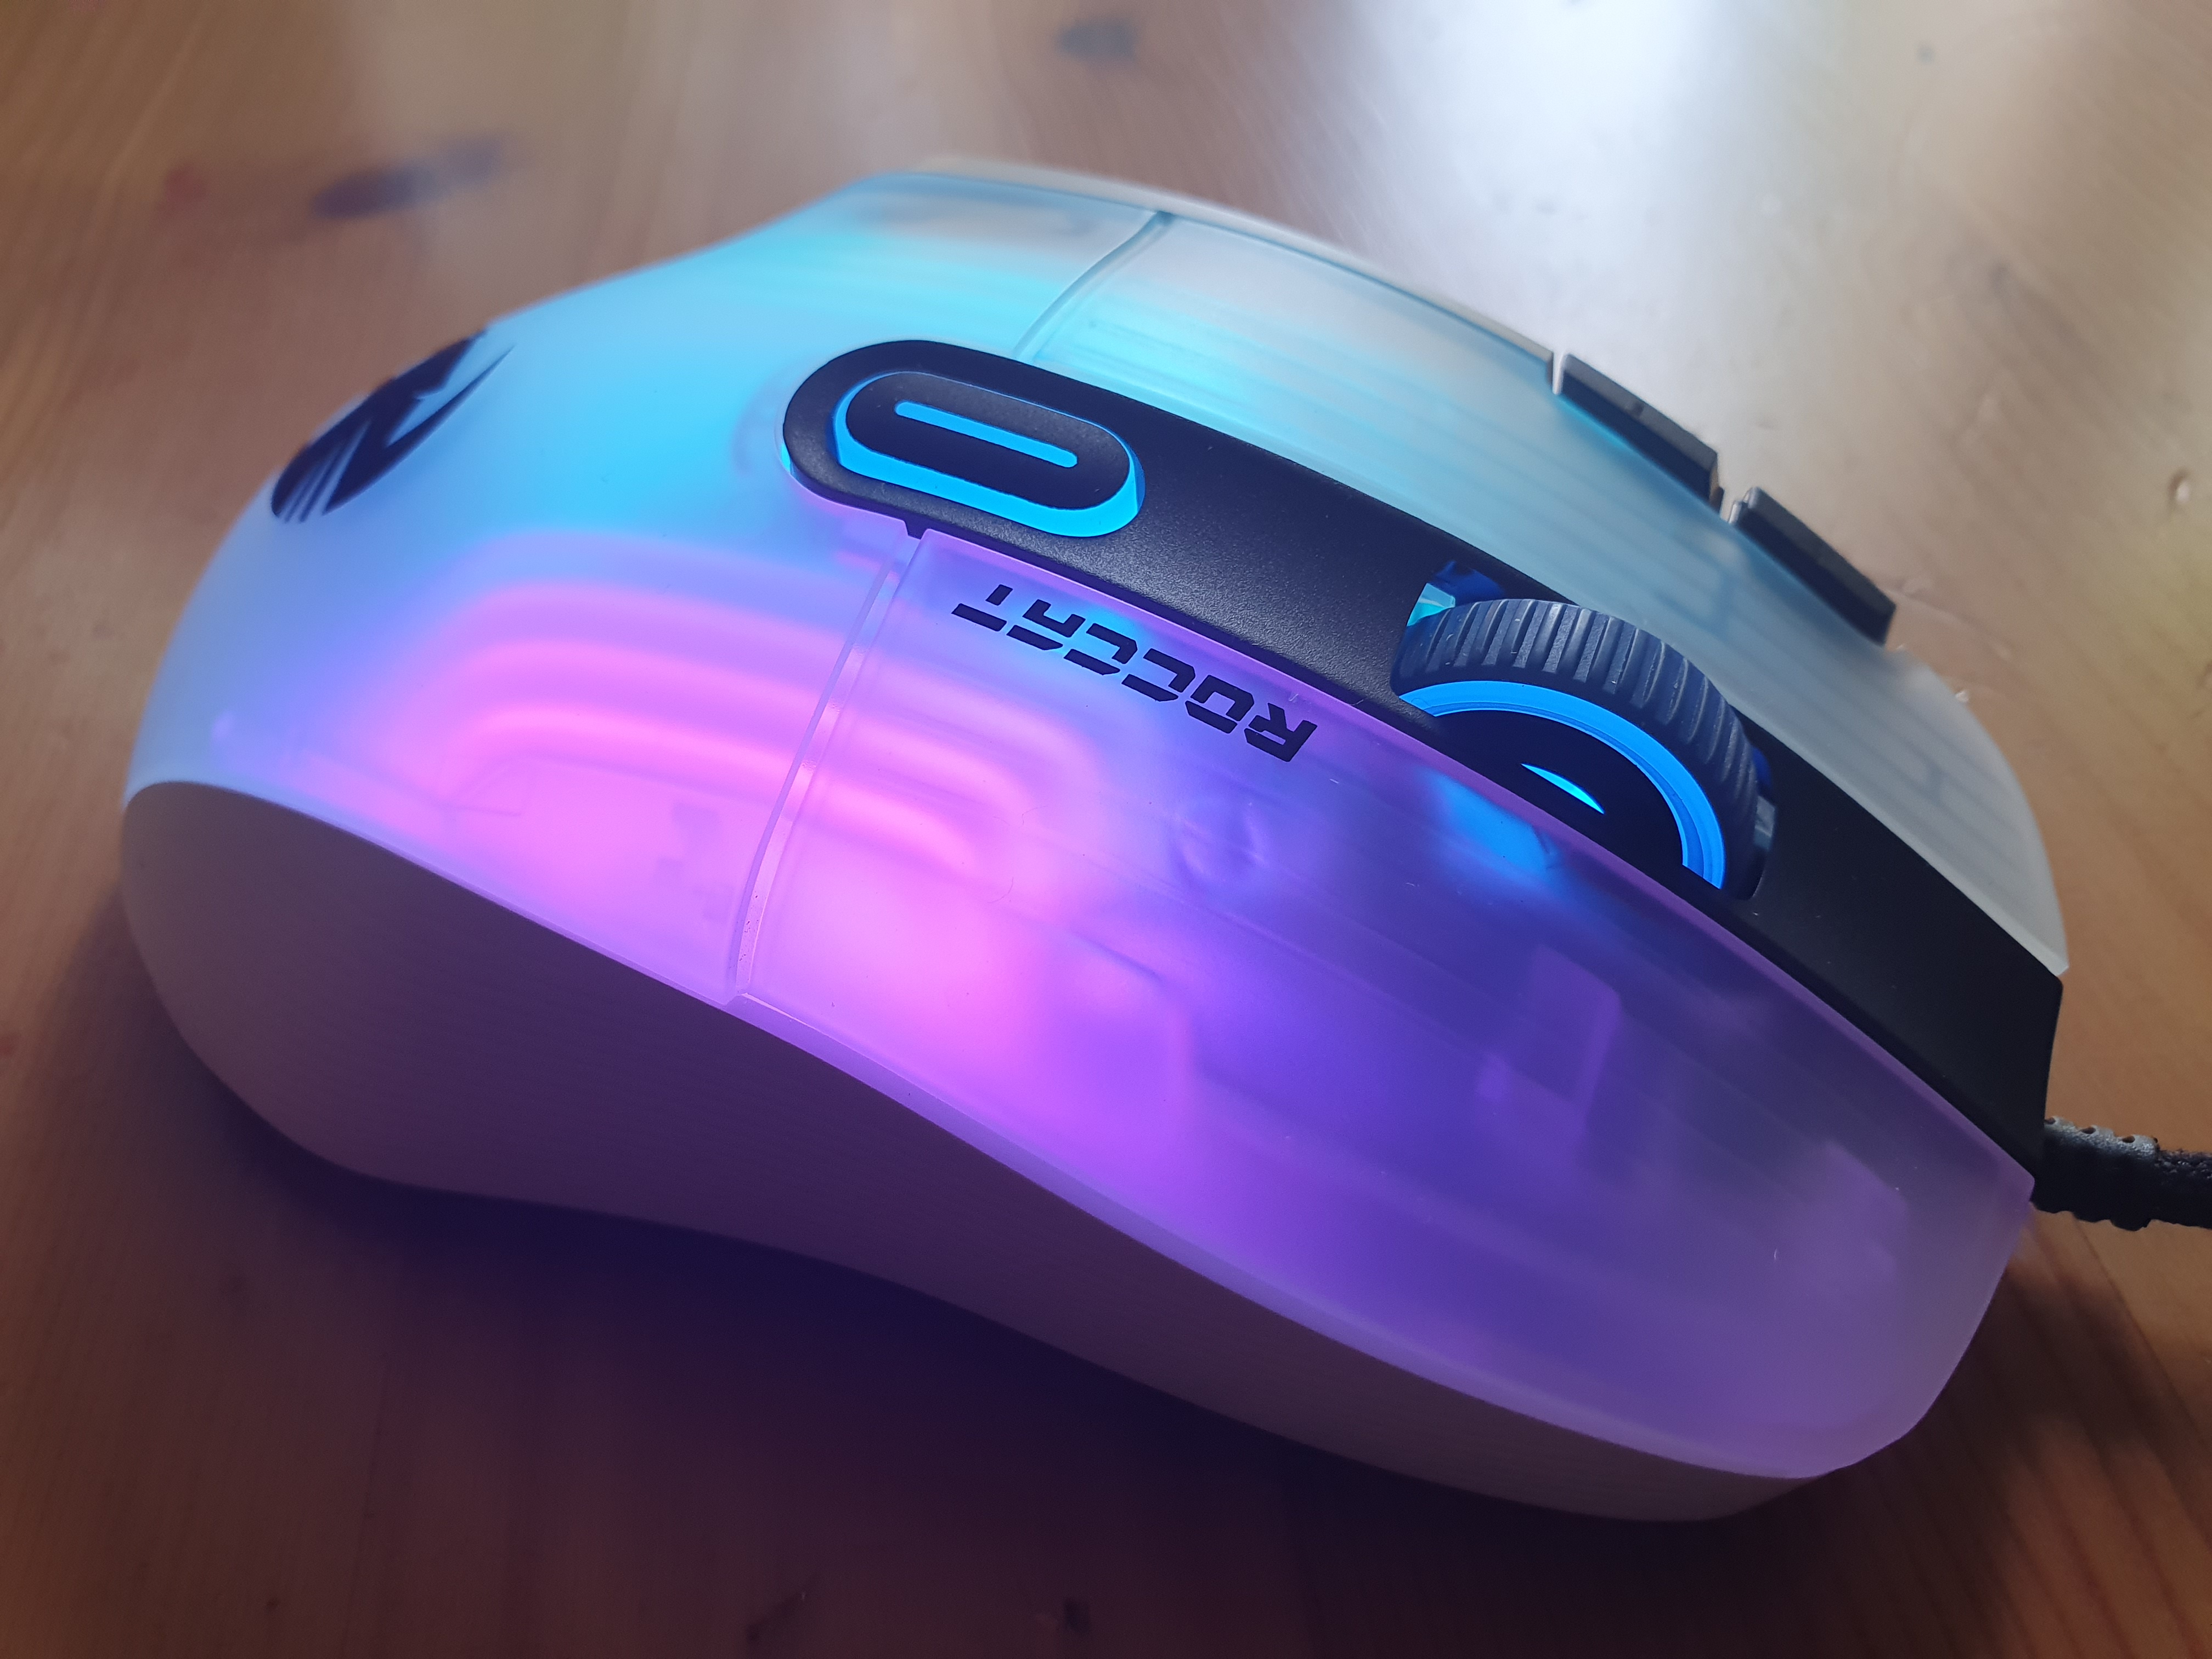 Roccat Kone XP - Best for MMO, RPG, and RTS gaming